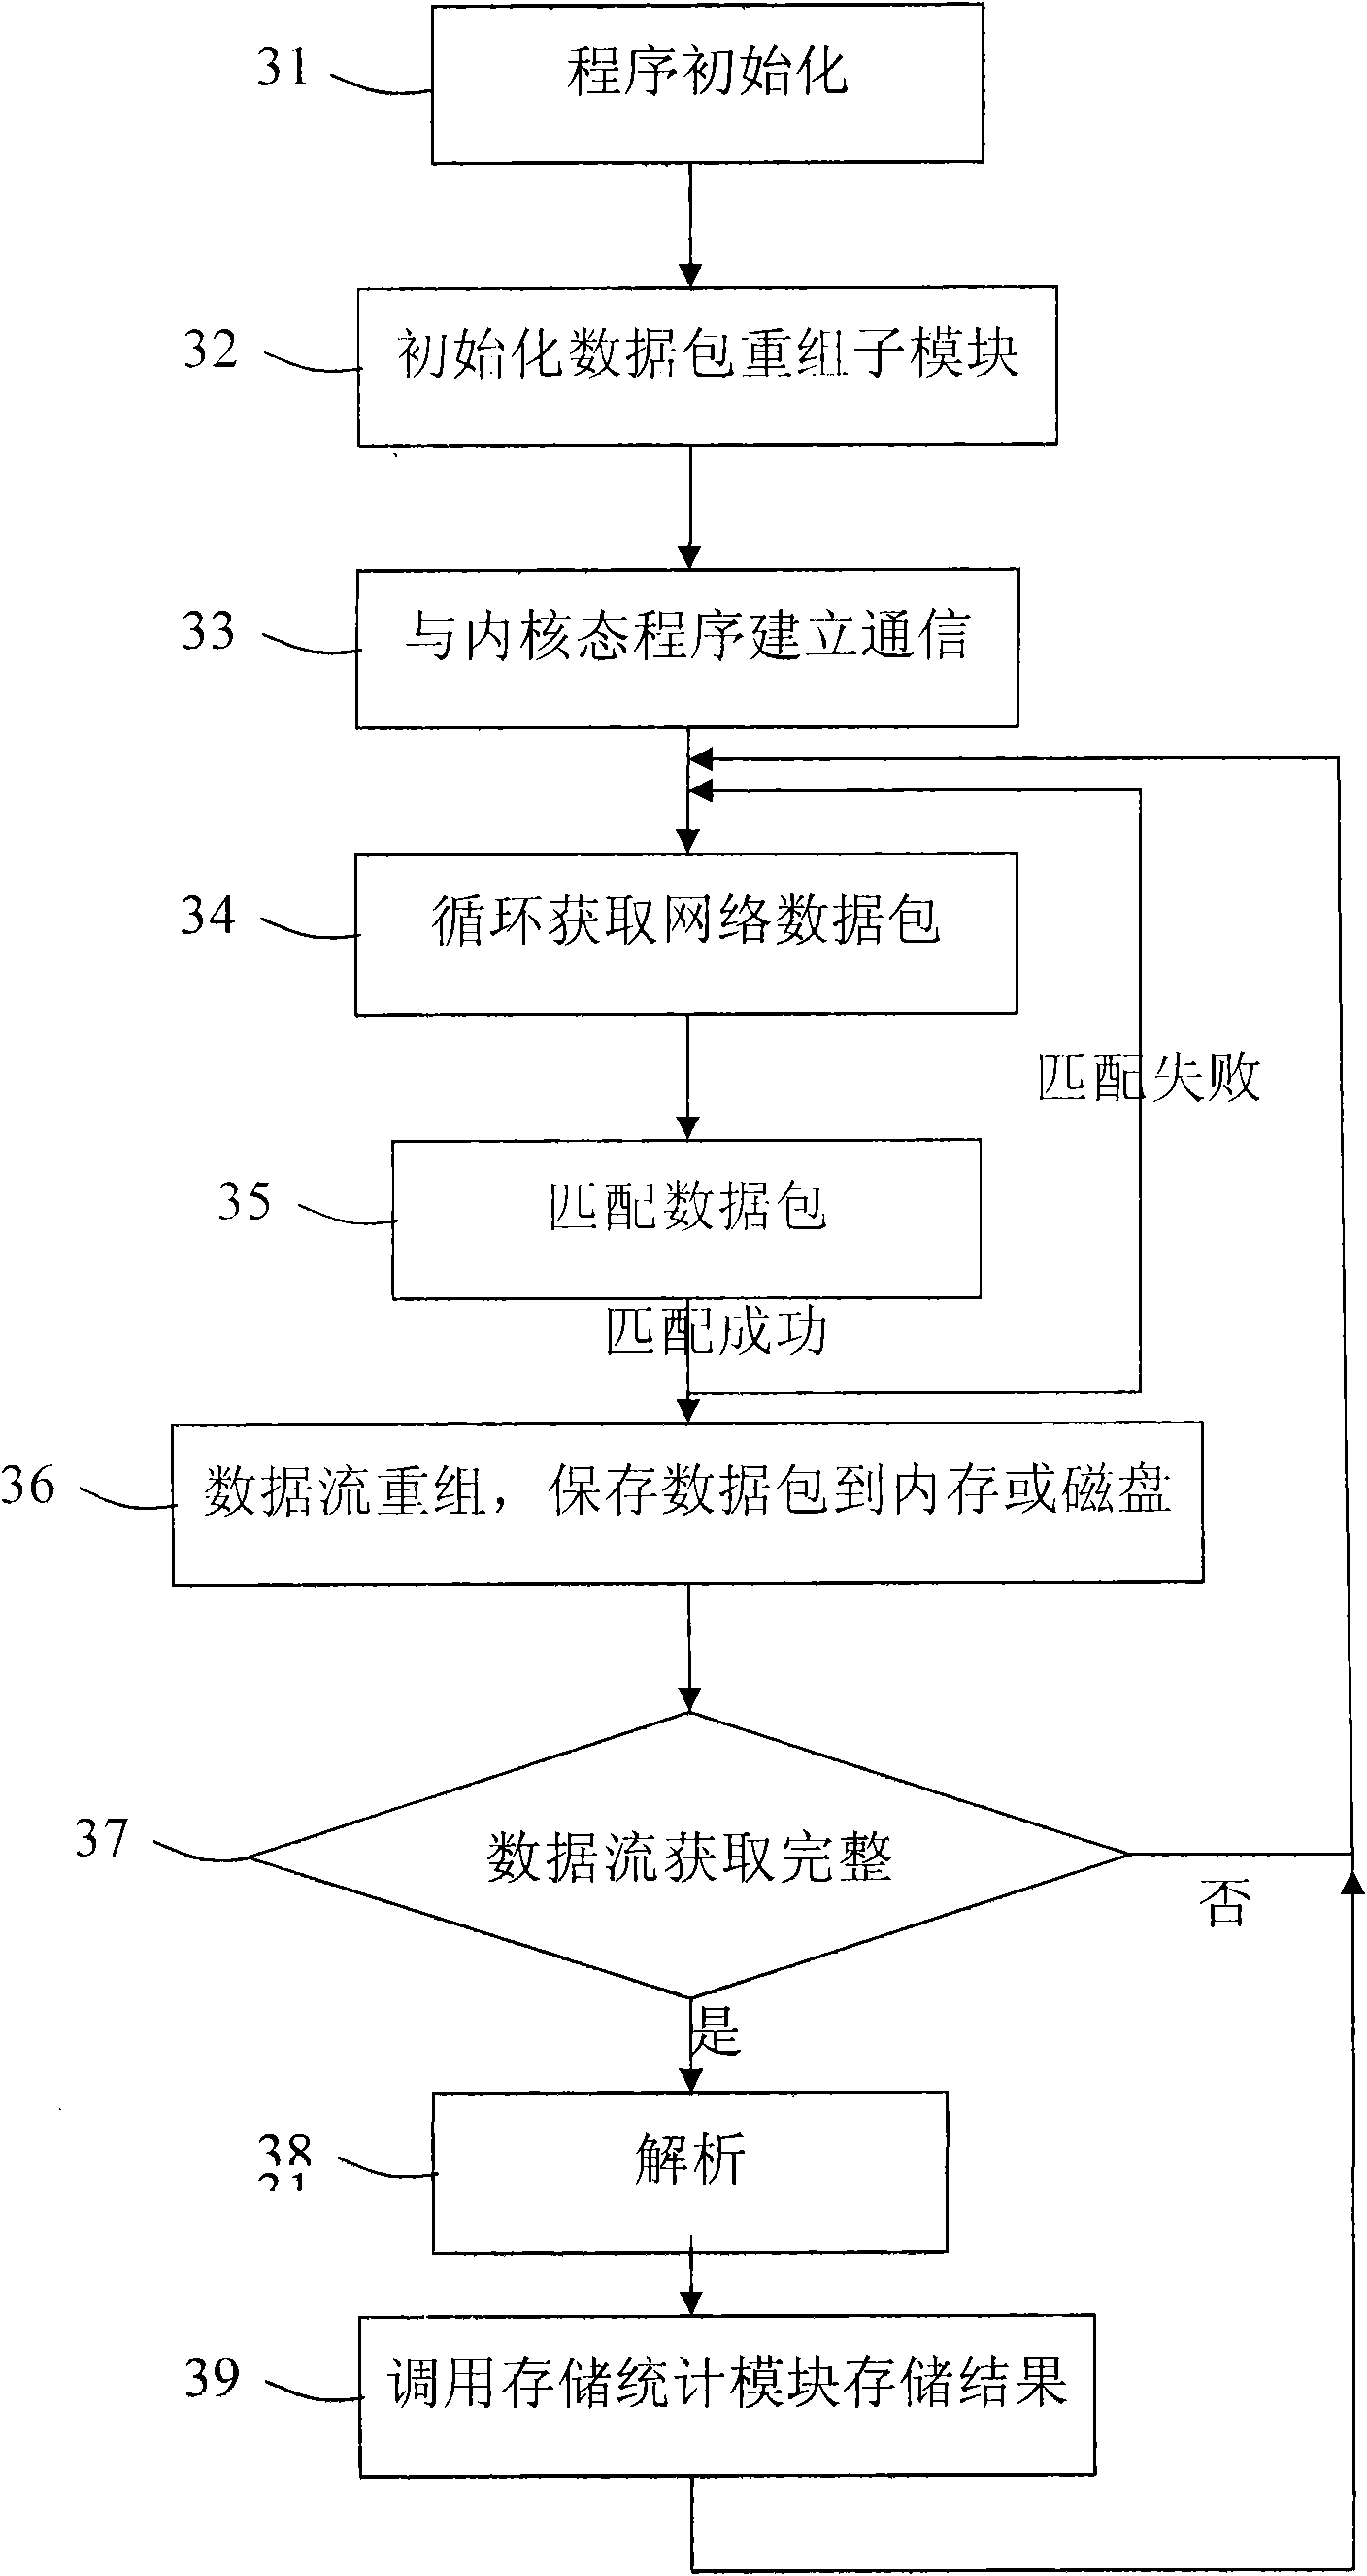 Method for information monitoring of network application layer